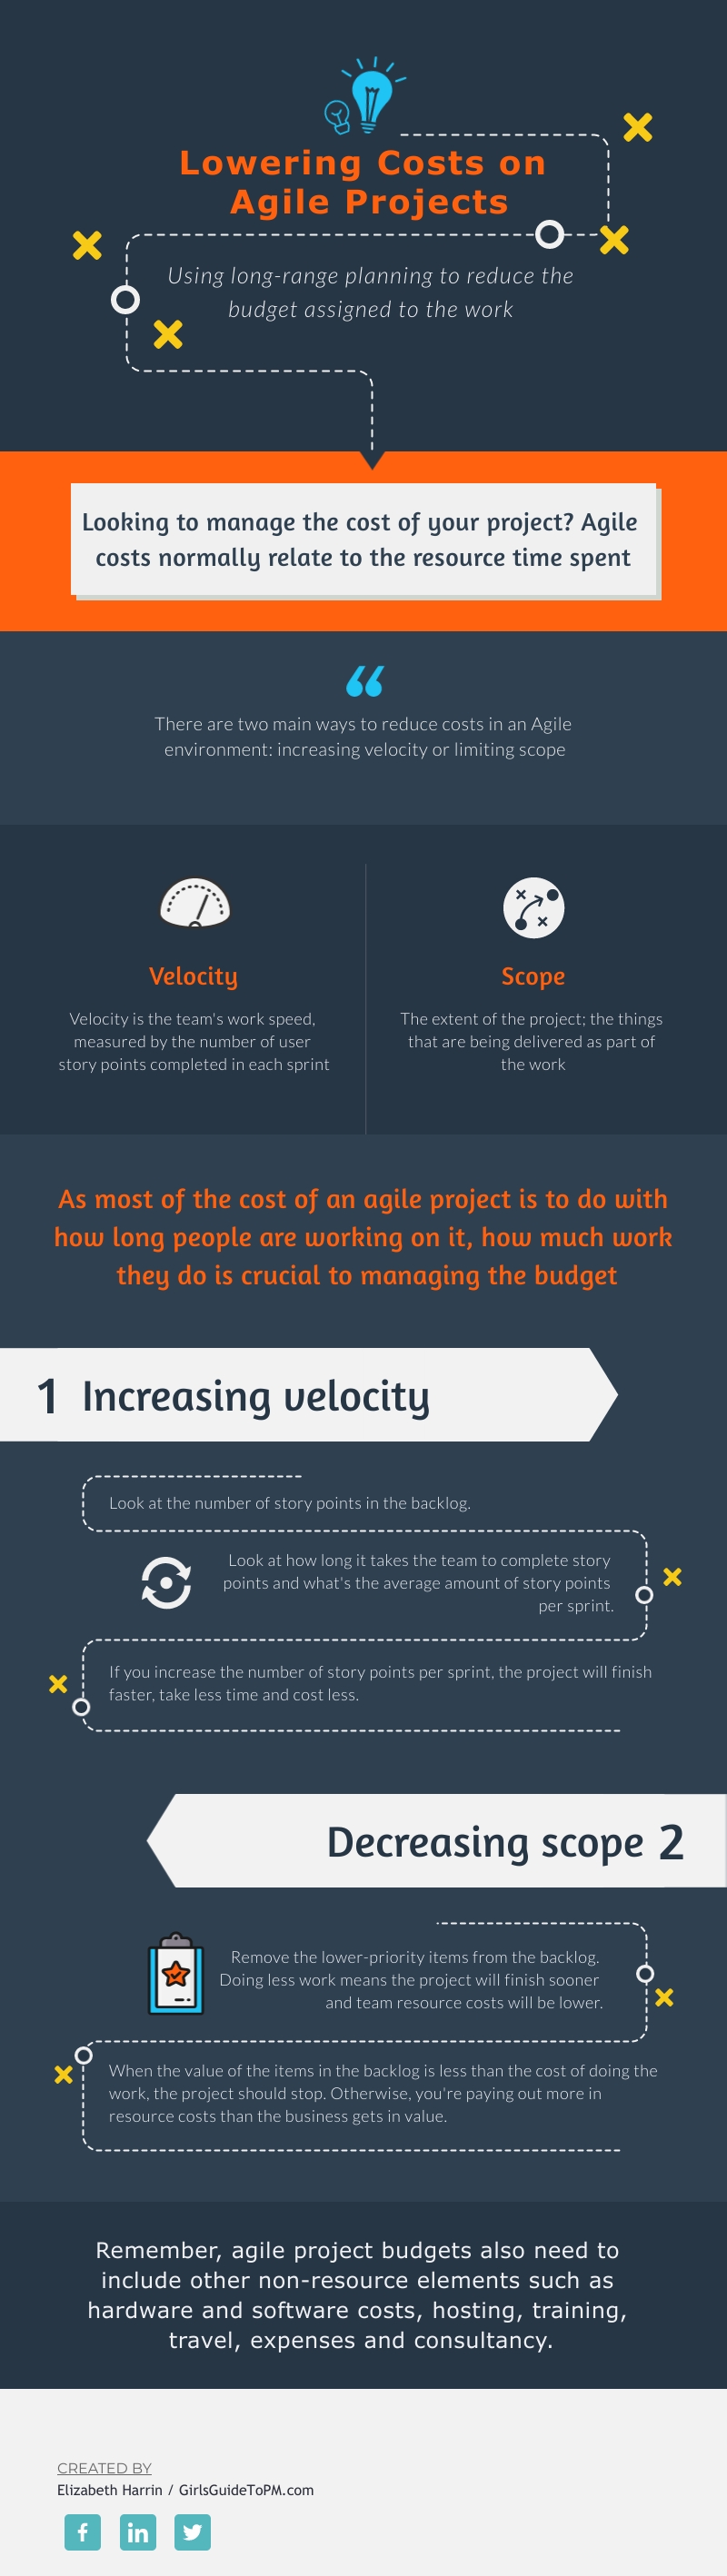 agile project infographic